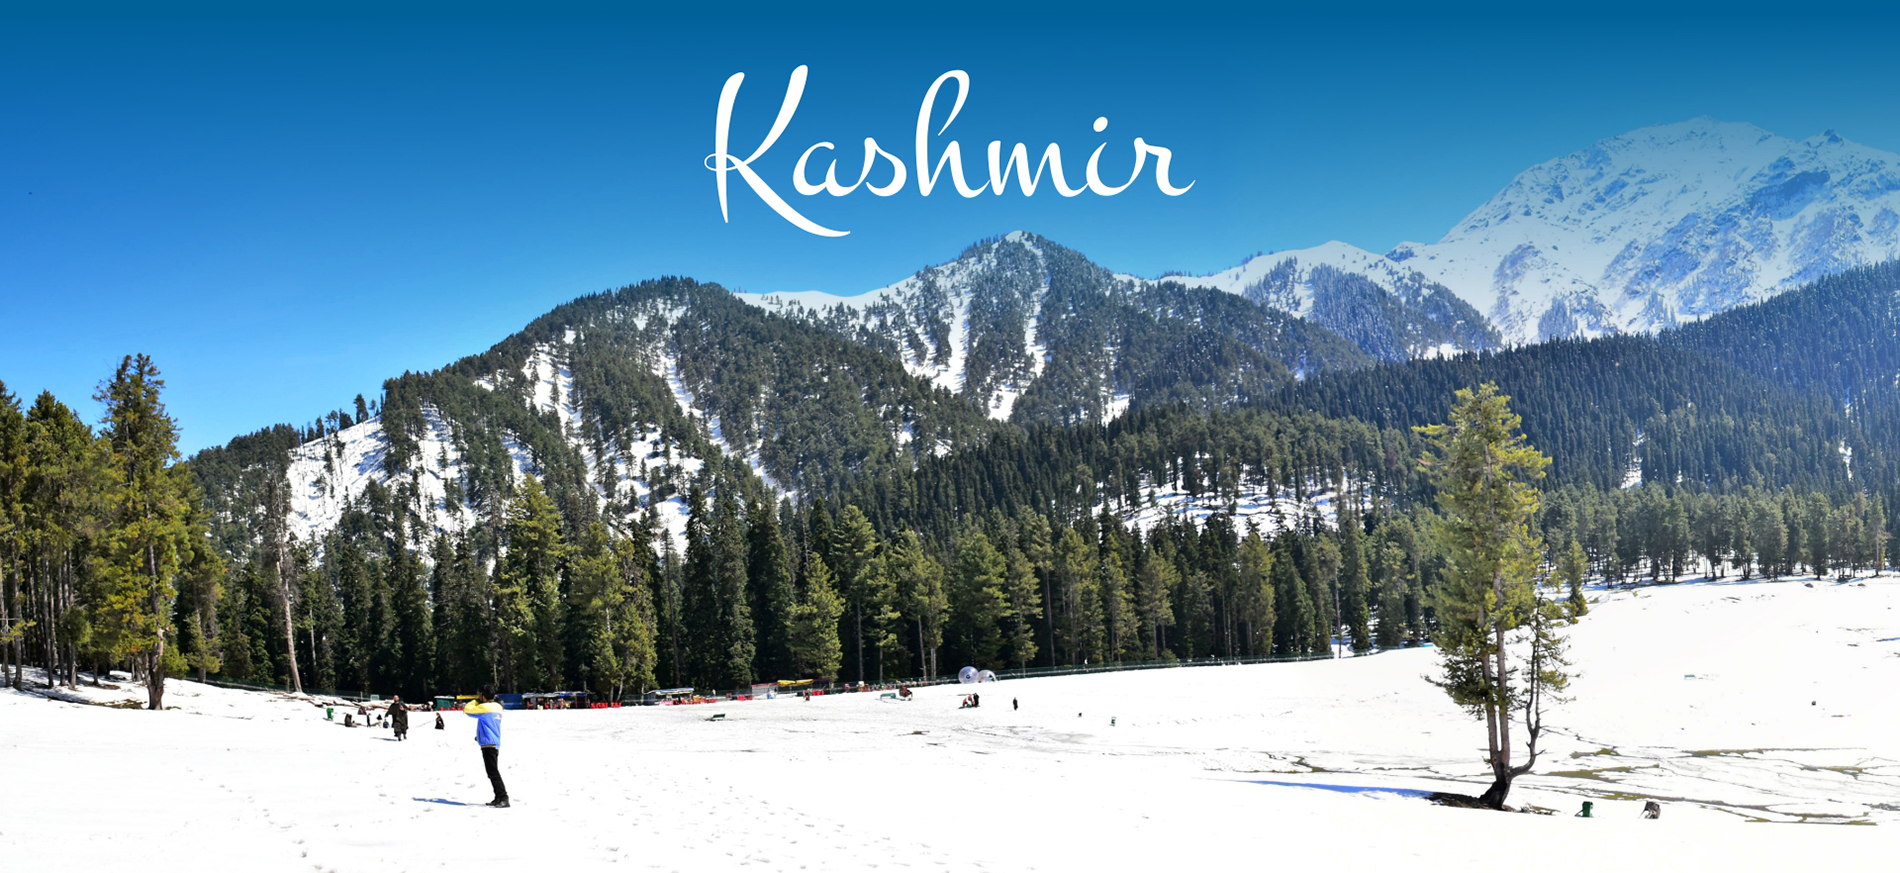 Deluxe Kashmir Tour Packages with Ajay Modi TravelsTour and TravelsTour PackagesAll Indiaother